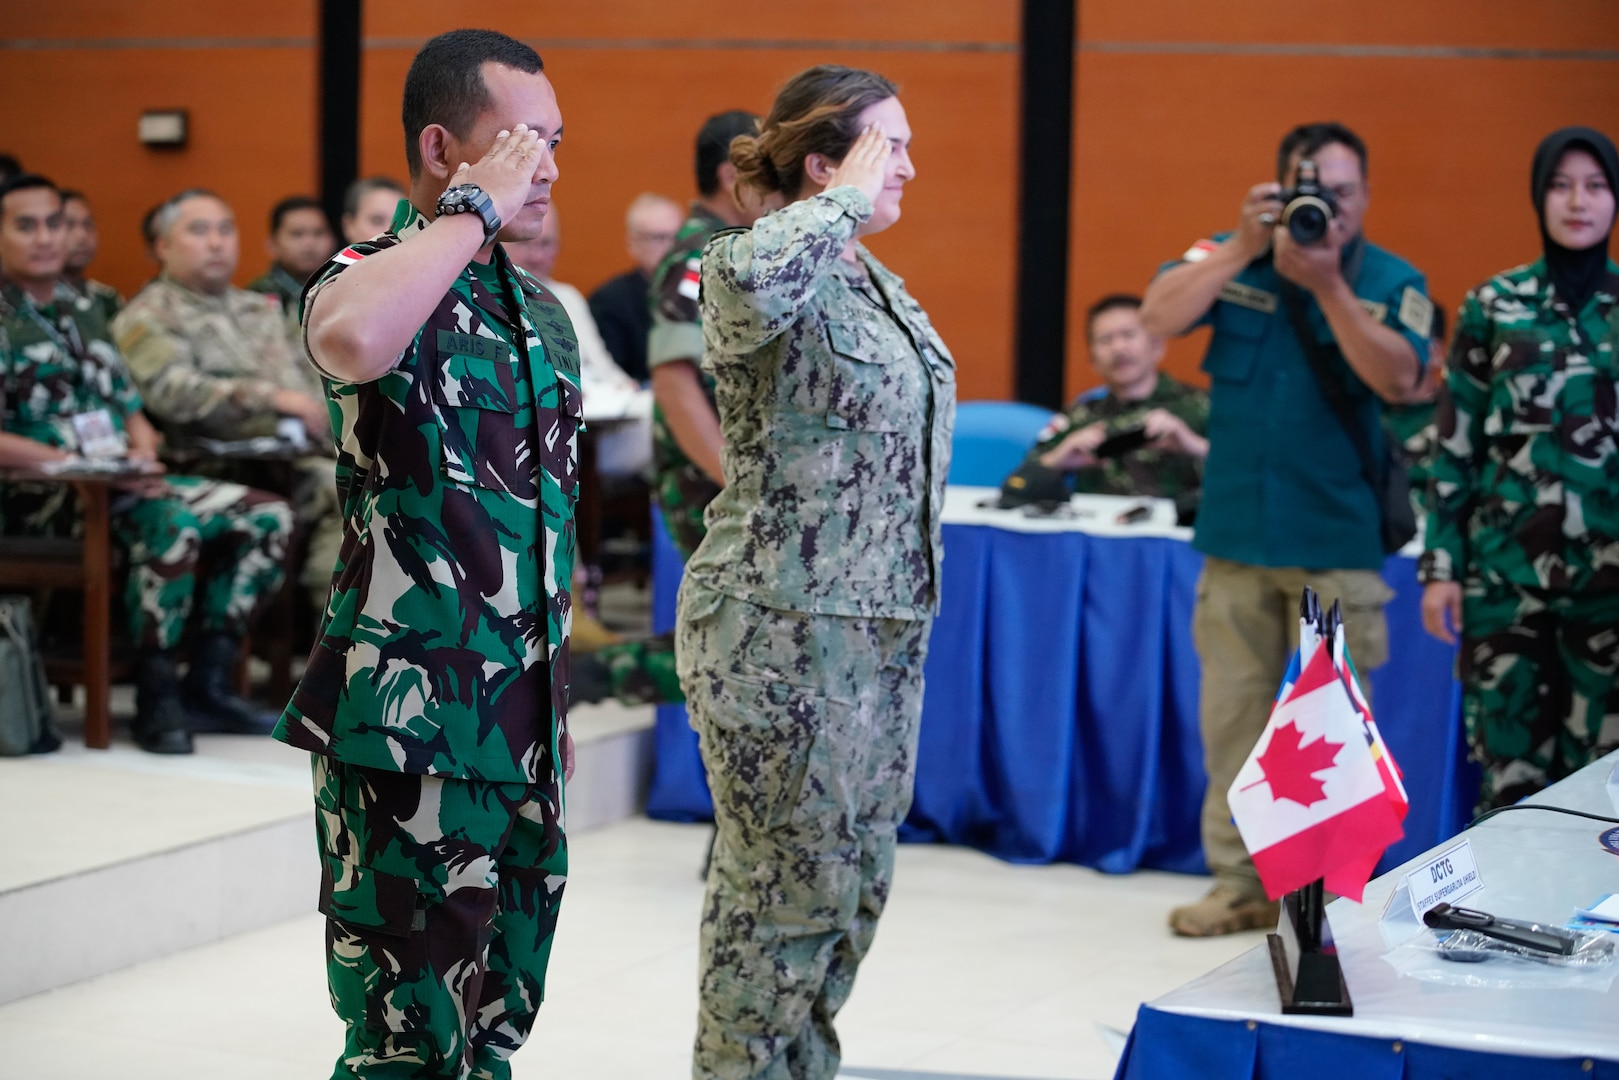 Maj. Aris, Tentara Nasional Indonesia (TNI) and Lt. Abbey Taylor, U.S. Navy, HSC-3, offer the first salute during the opening ceremony of the staff exercise portion of Super Garuda Shield 2023 (SGS23) August 31, 2023, Surabaya Indonesia. #SuperGarudaShield 2023 is an annual exercise that has significantly grown in scope and size since 2009. #SGS2023 is the second consecutive time this exercise has grown into a combined and #joint event, highlighting the 6 participating and 12 observing nations’ commitment to #partnership and a #freeandopenindopacific. (US Air National Guard Photo by Air Force Master Sgt. Andrew Lee Jackson)